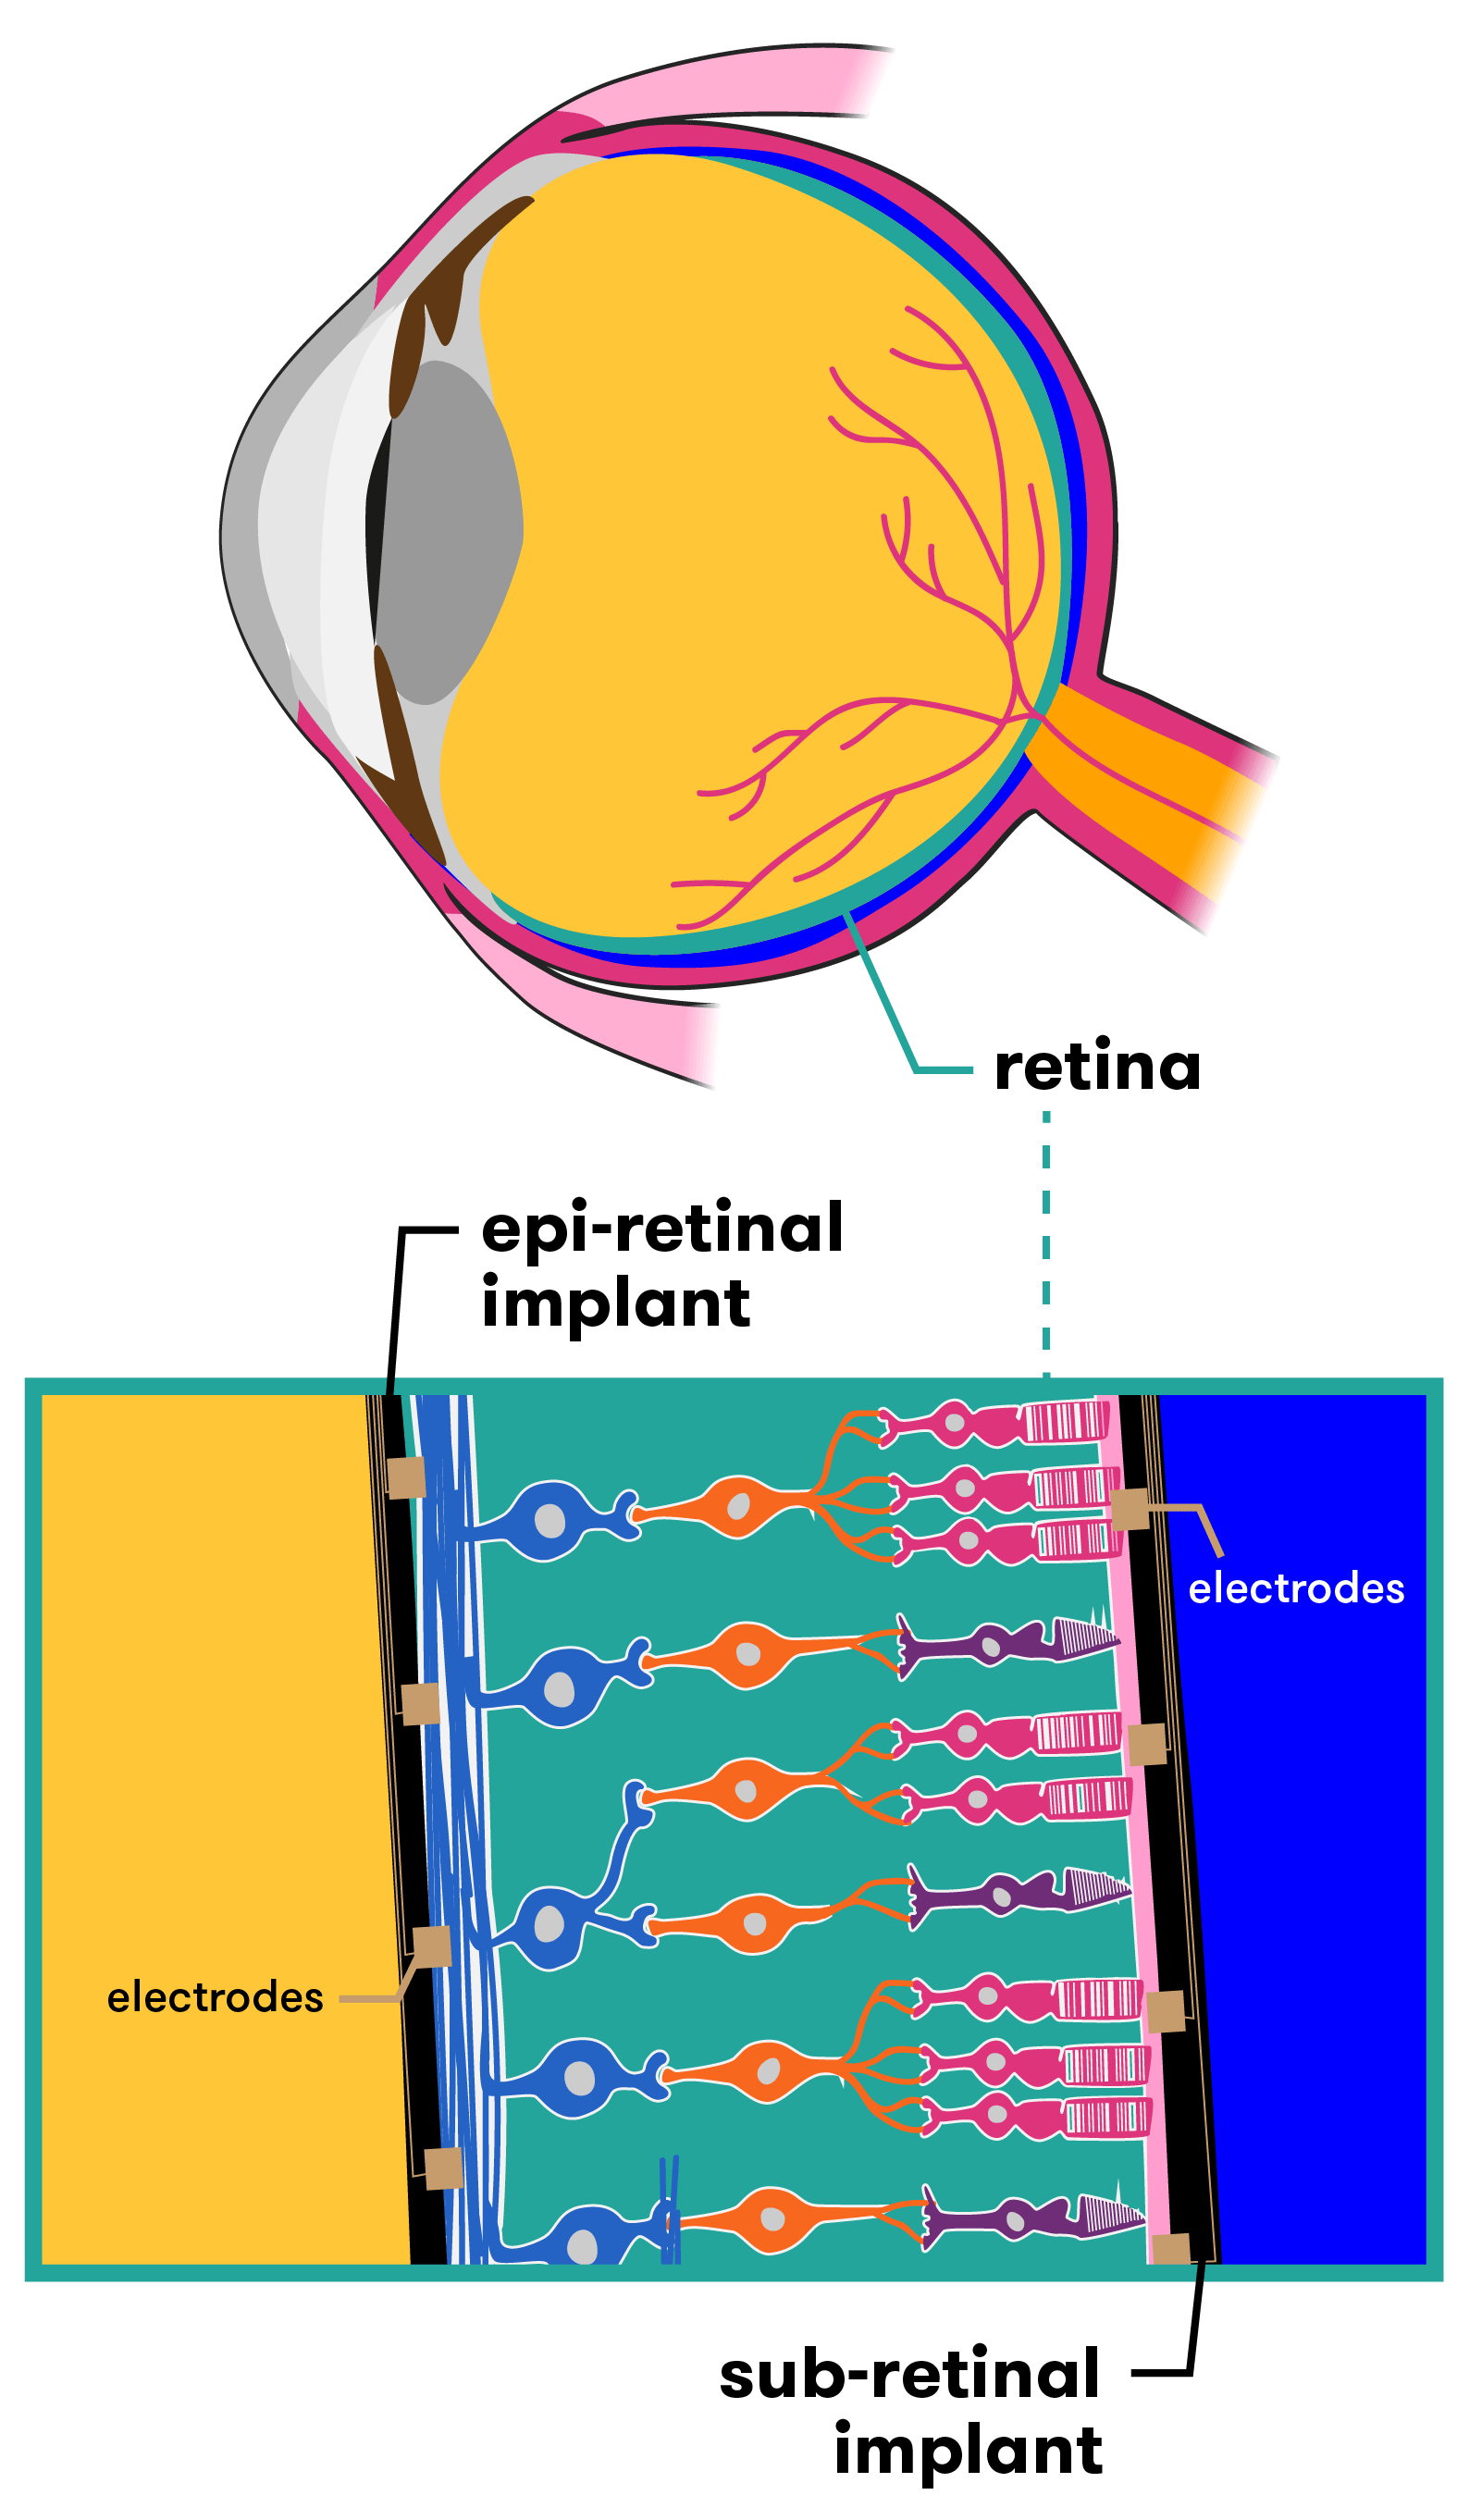 Epiretinal implants are placed in front of the retina; subretinal implants are placed at the back.